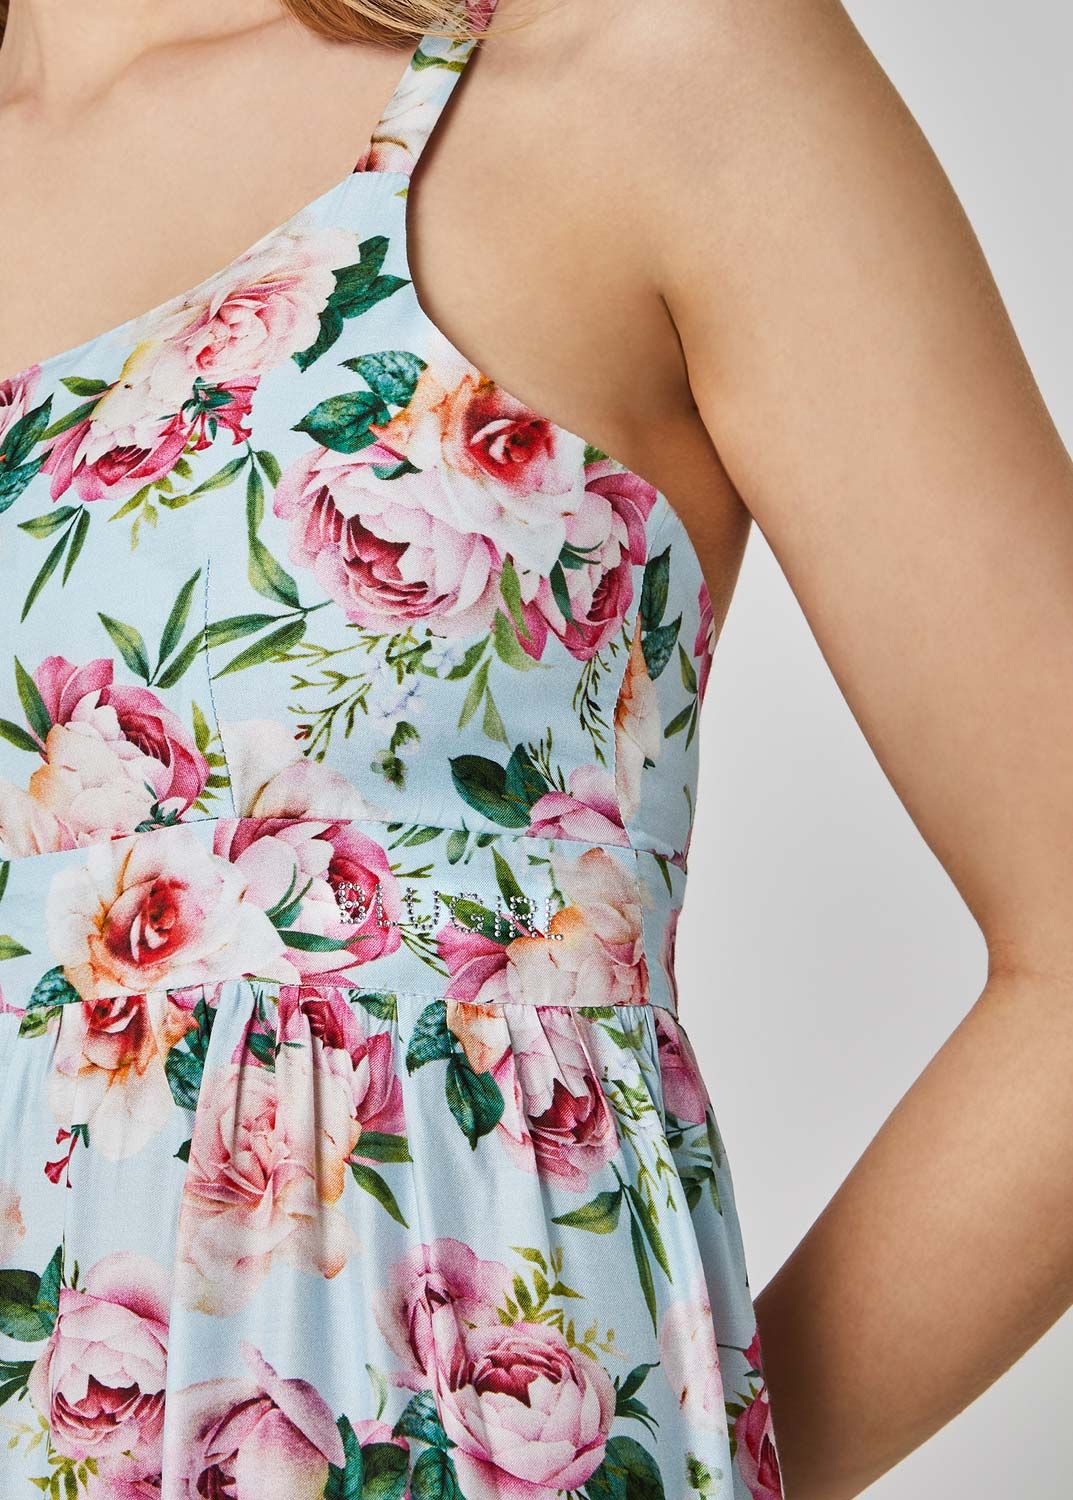 Blugirl floral dress with straps